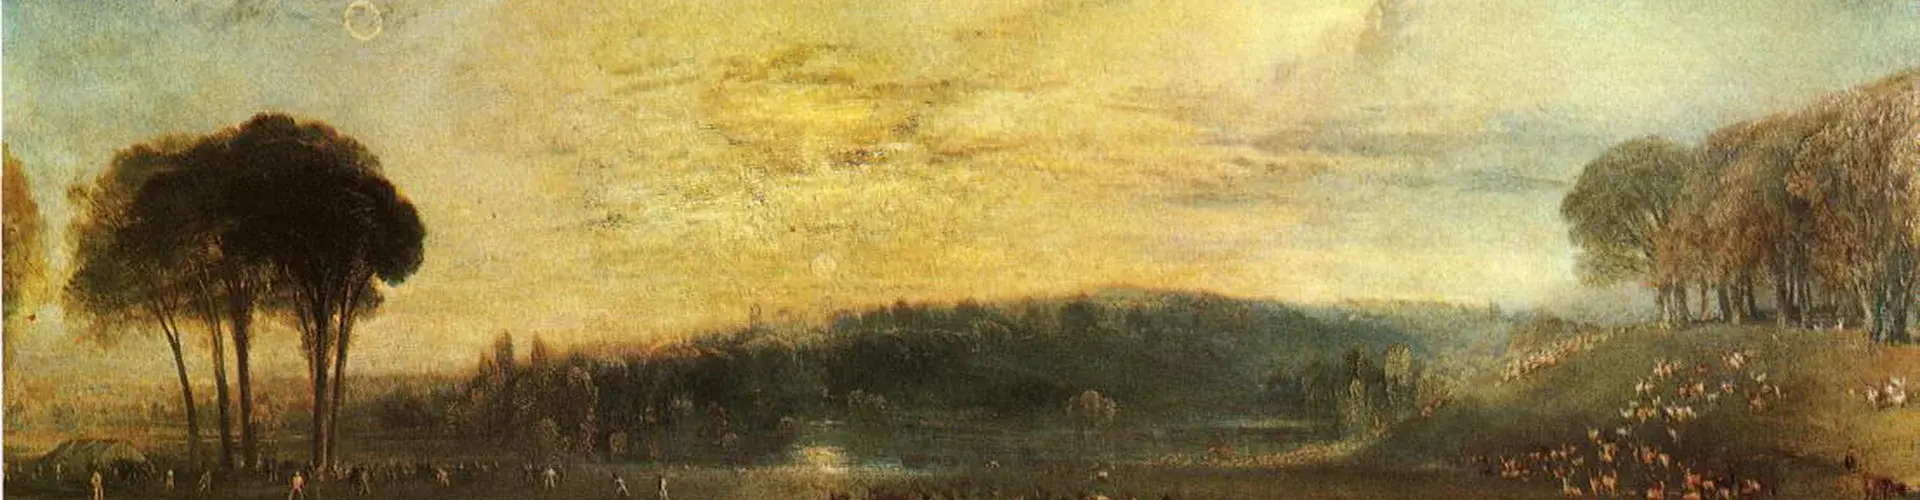 Researchers used images of old paintings, such as this one painted by the British artist J. M. W. Turner in 1829, to study the Earth's past atmosphere